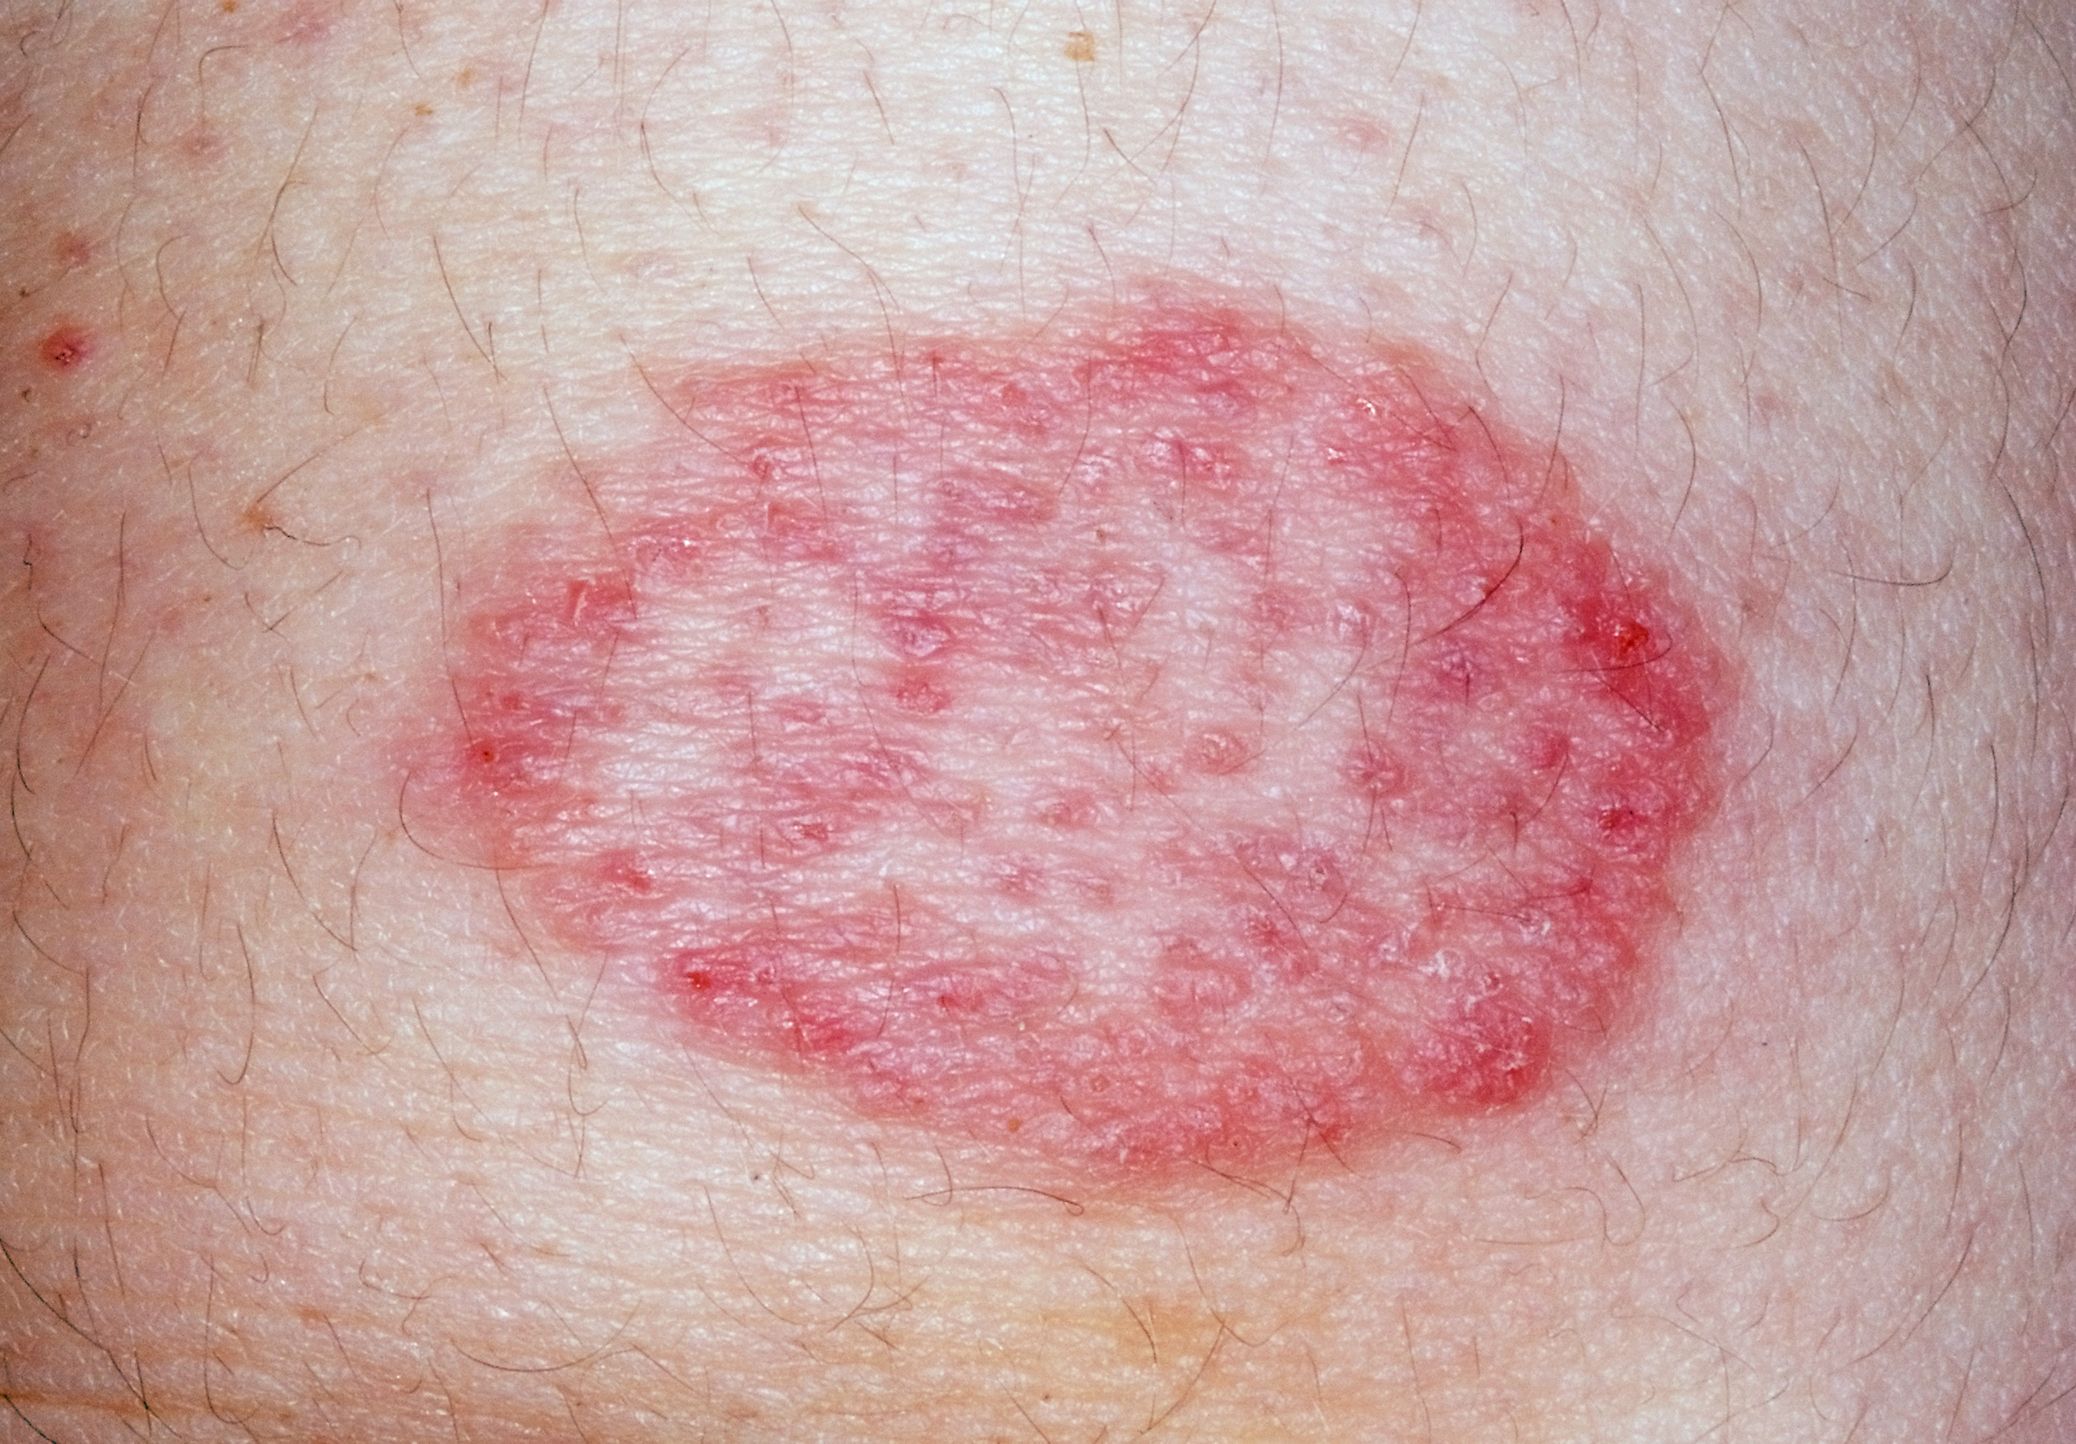 Causes of Red Bumps and Spots on Legs